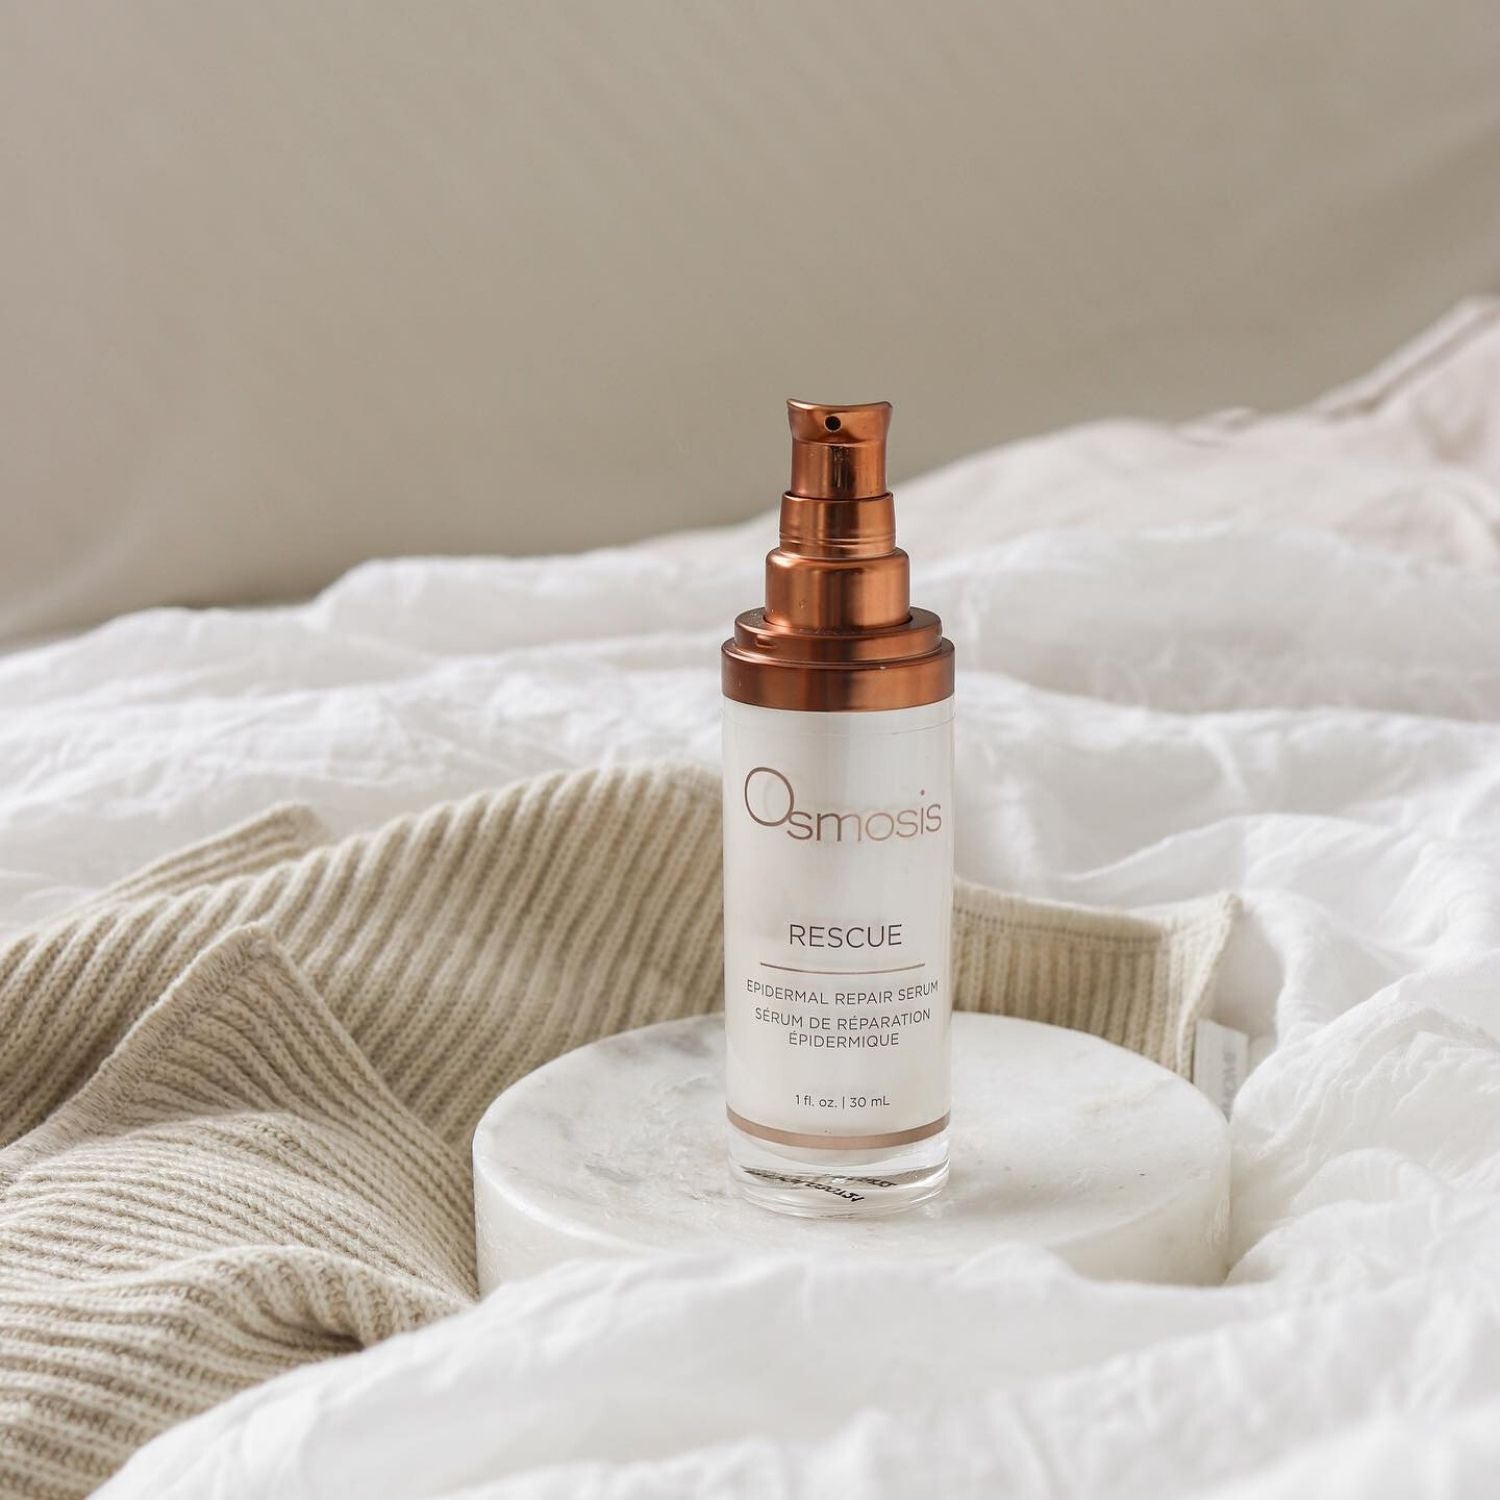 bottle of skincare without cap on displayed on various white linens